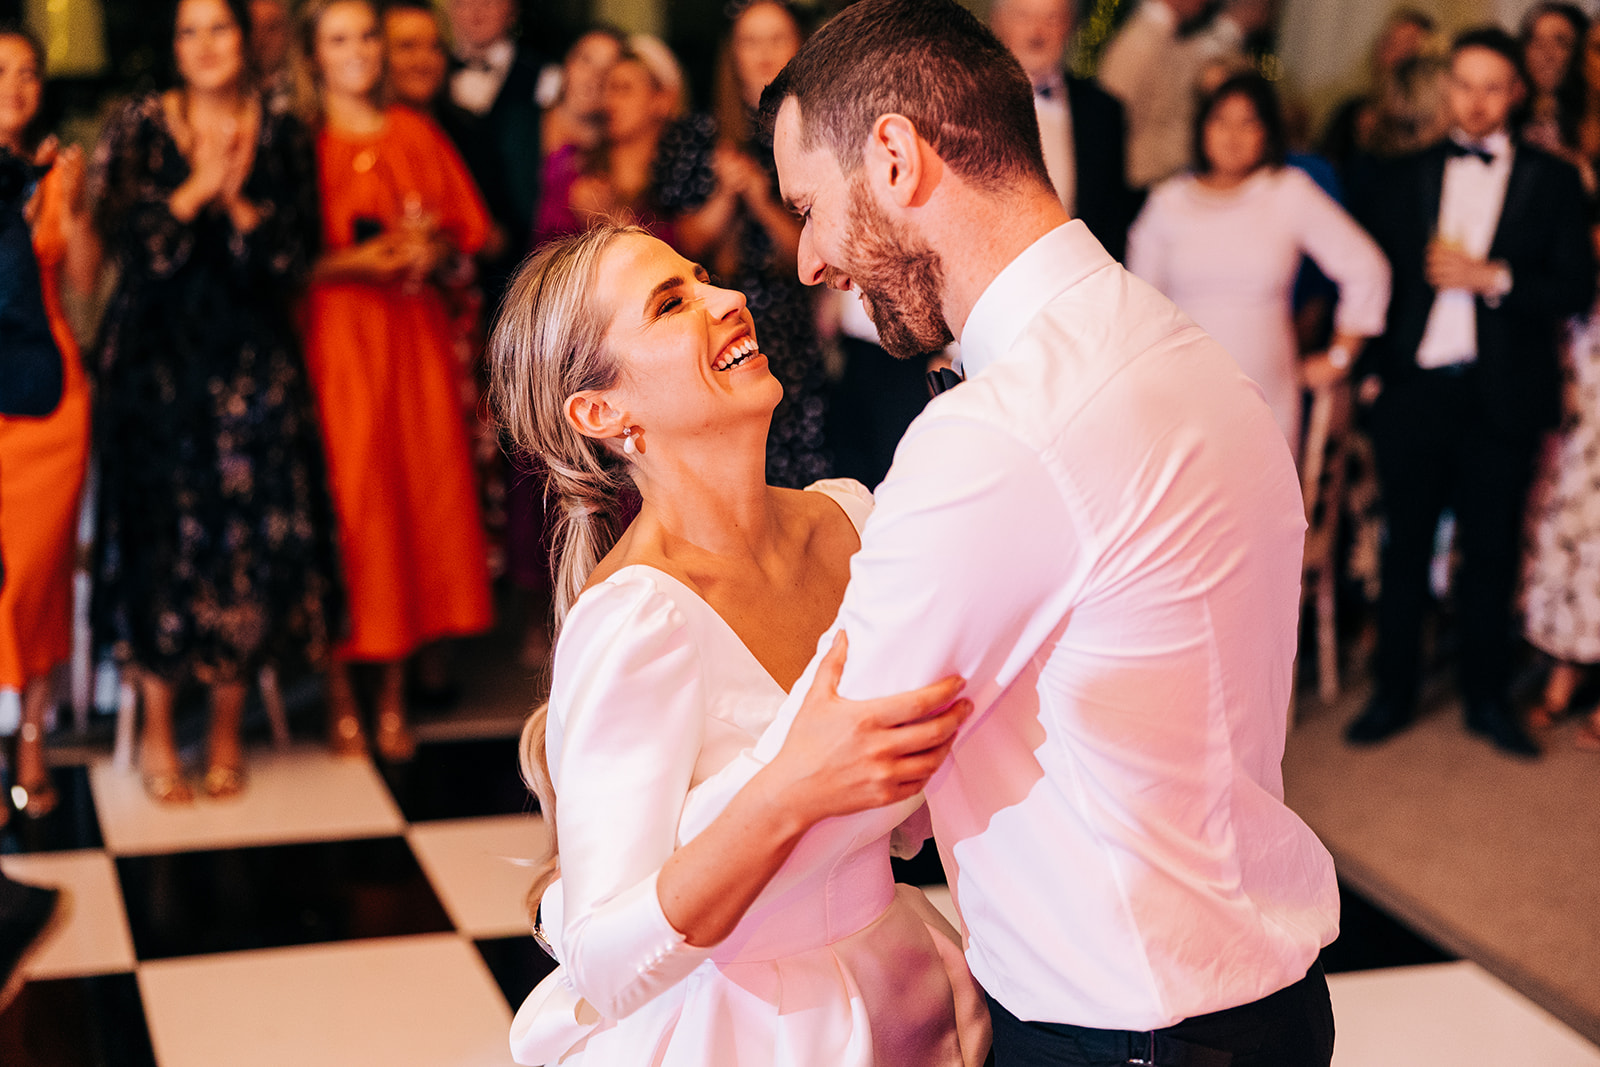 Katie and Seán's first dance in clonabreany house, surrounded by all their family and friends